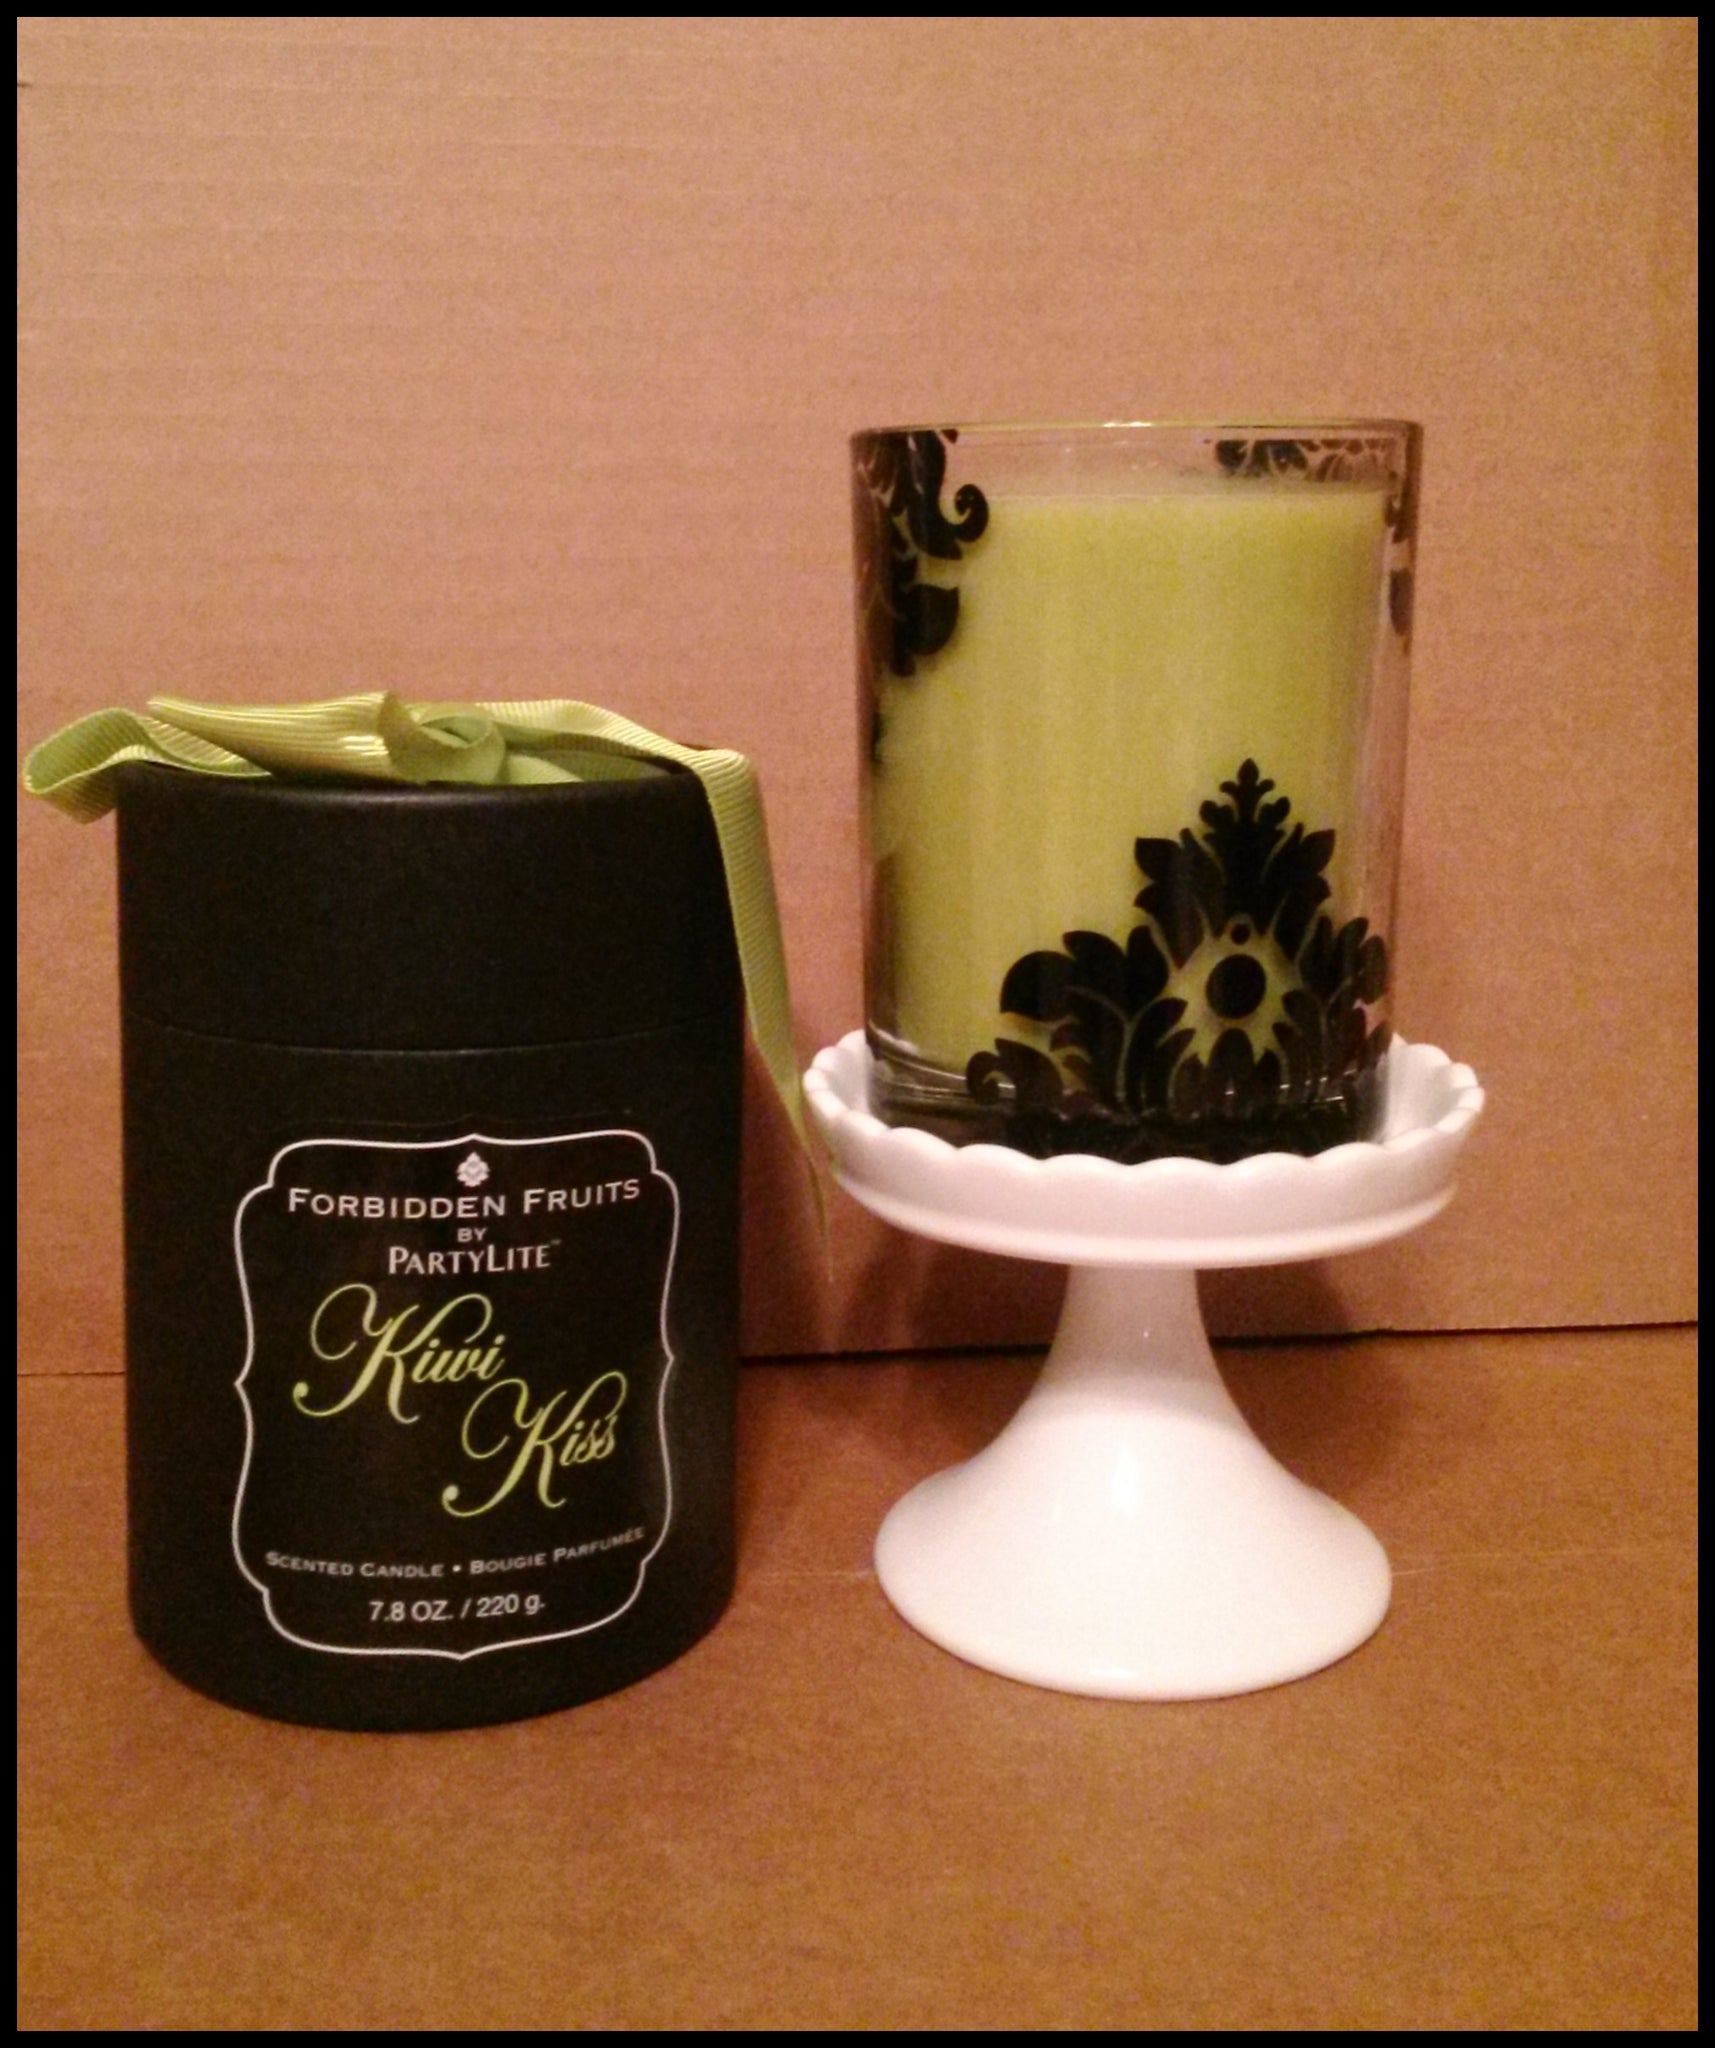 PartyLite Forbidden Fruit KIWI KISS Jar Gift Boxed Candle w/ JUST DESSERTS WHITE Pedestal Stand